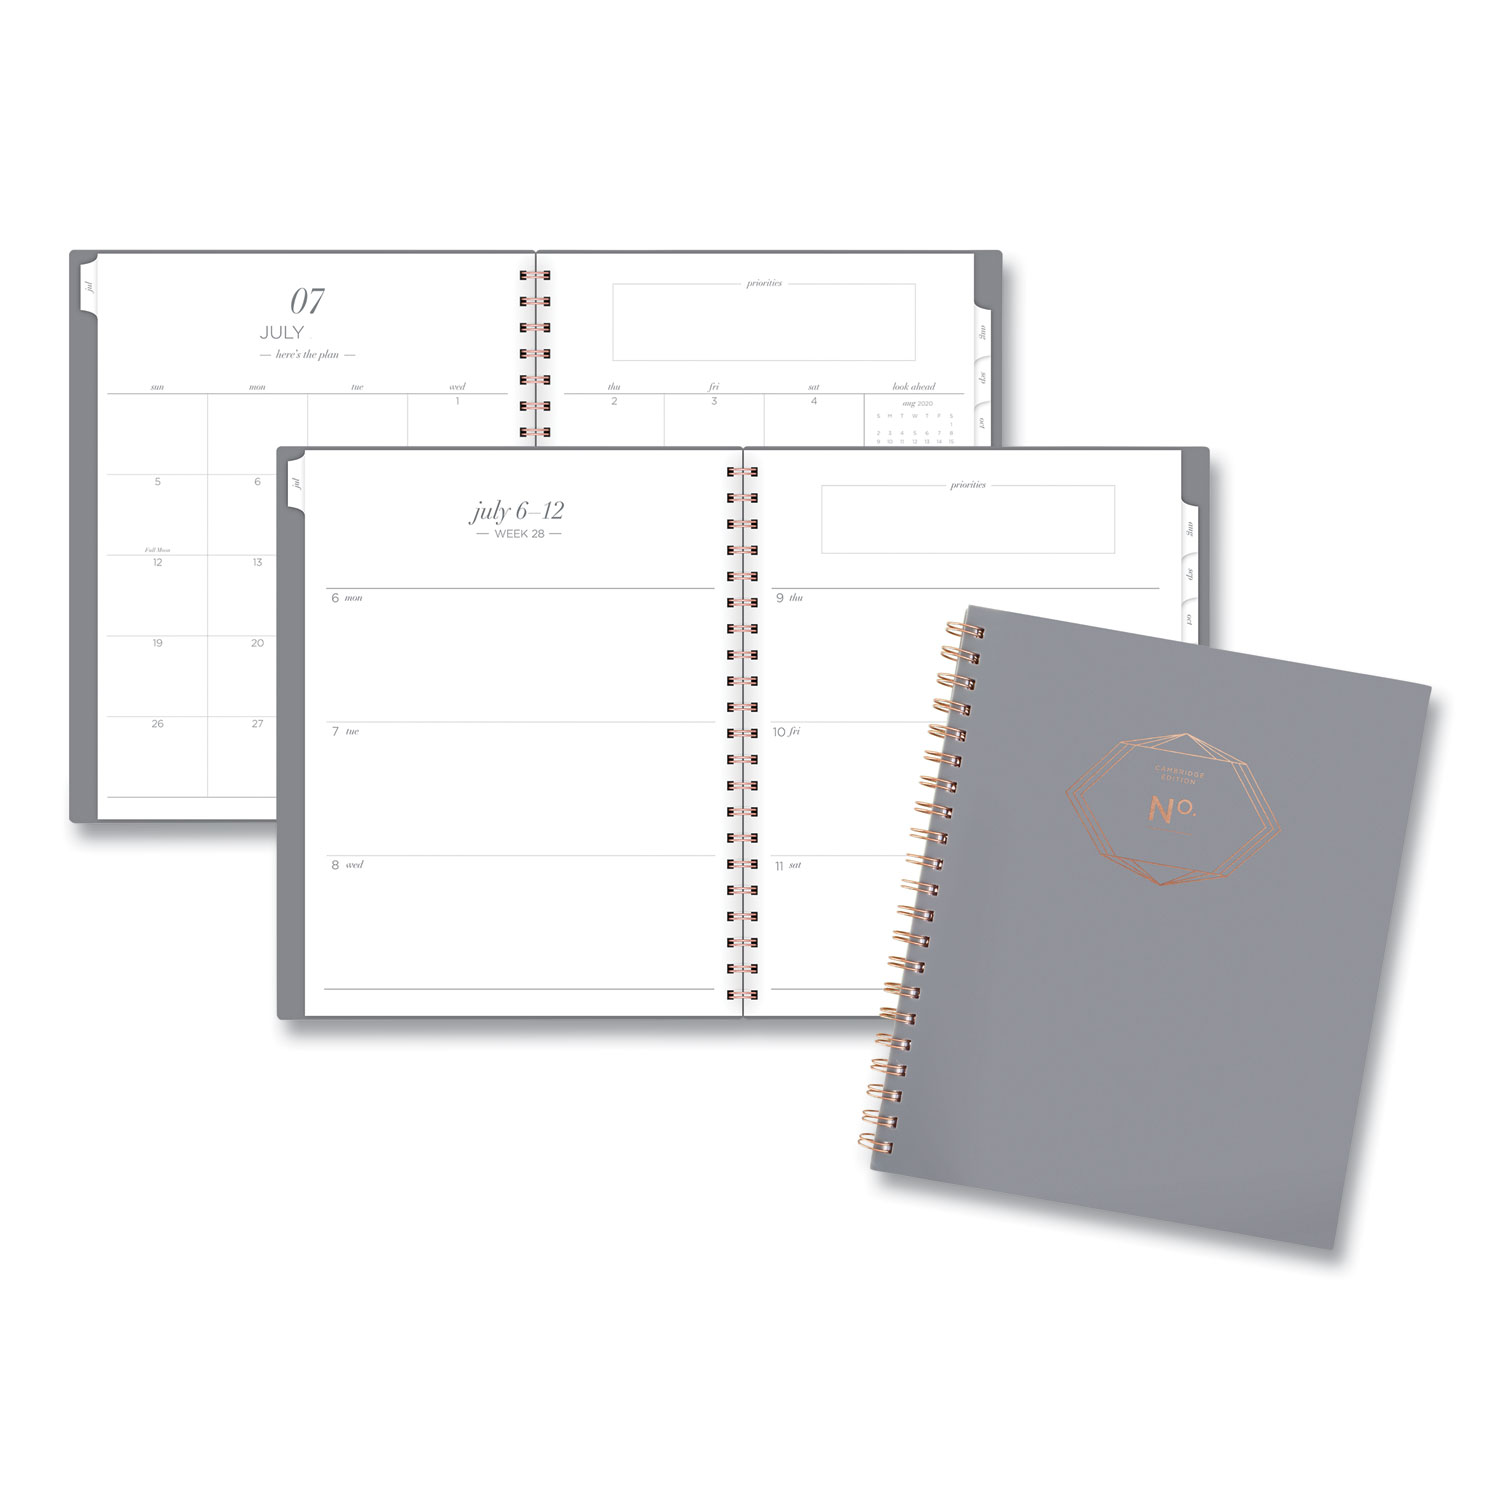  Cambridge 1442905A30 Workstyle Academic Planner, 11 x 8.5, Gray Gem, 2020-2021 (AAG1442905A30) 